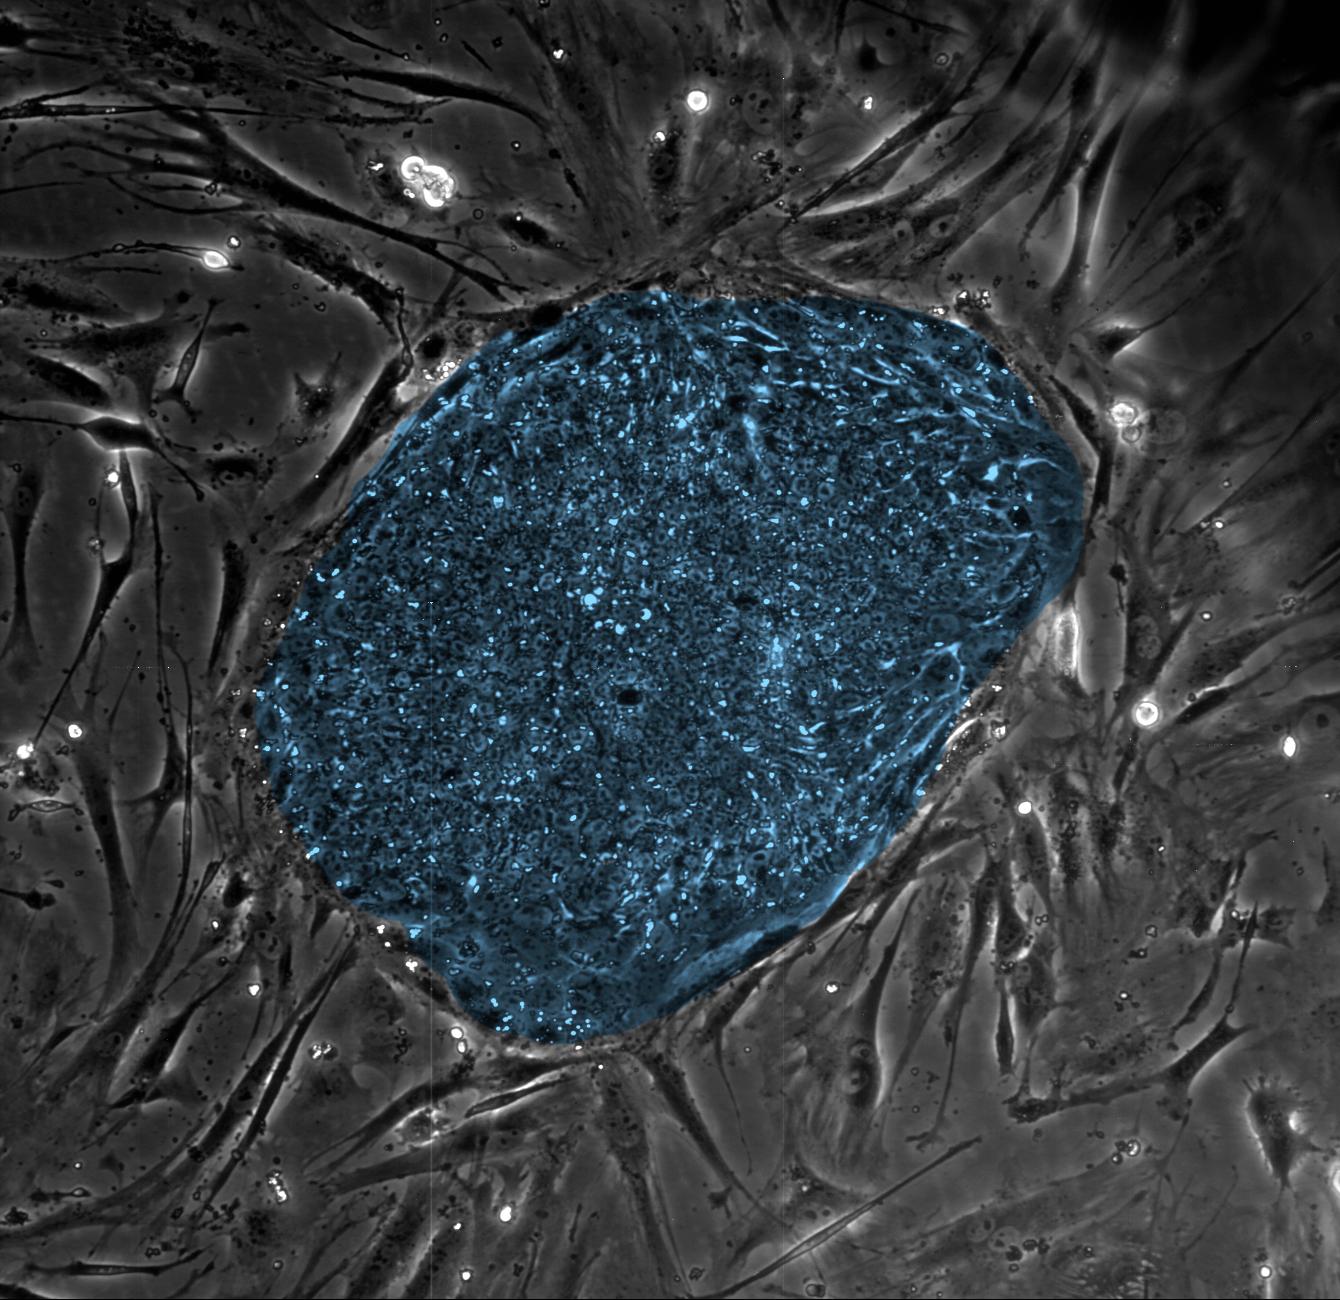 A colony of human embryonic stem cells (center, blue) from the lab of the University of Wisconsin-Madison’s James Thomson. These cells, which arise at the earliest stages of development, are blank-slate cells capable of differentiating into any of the 220